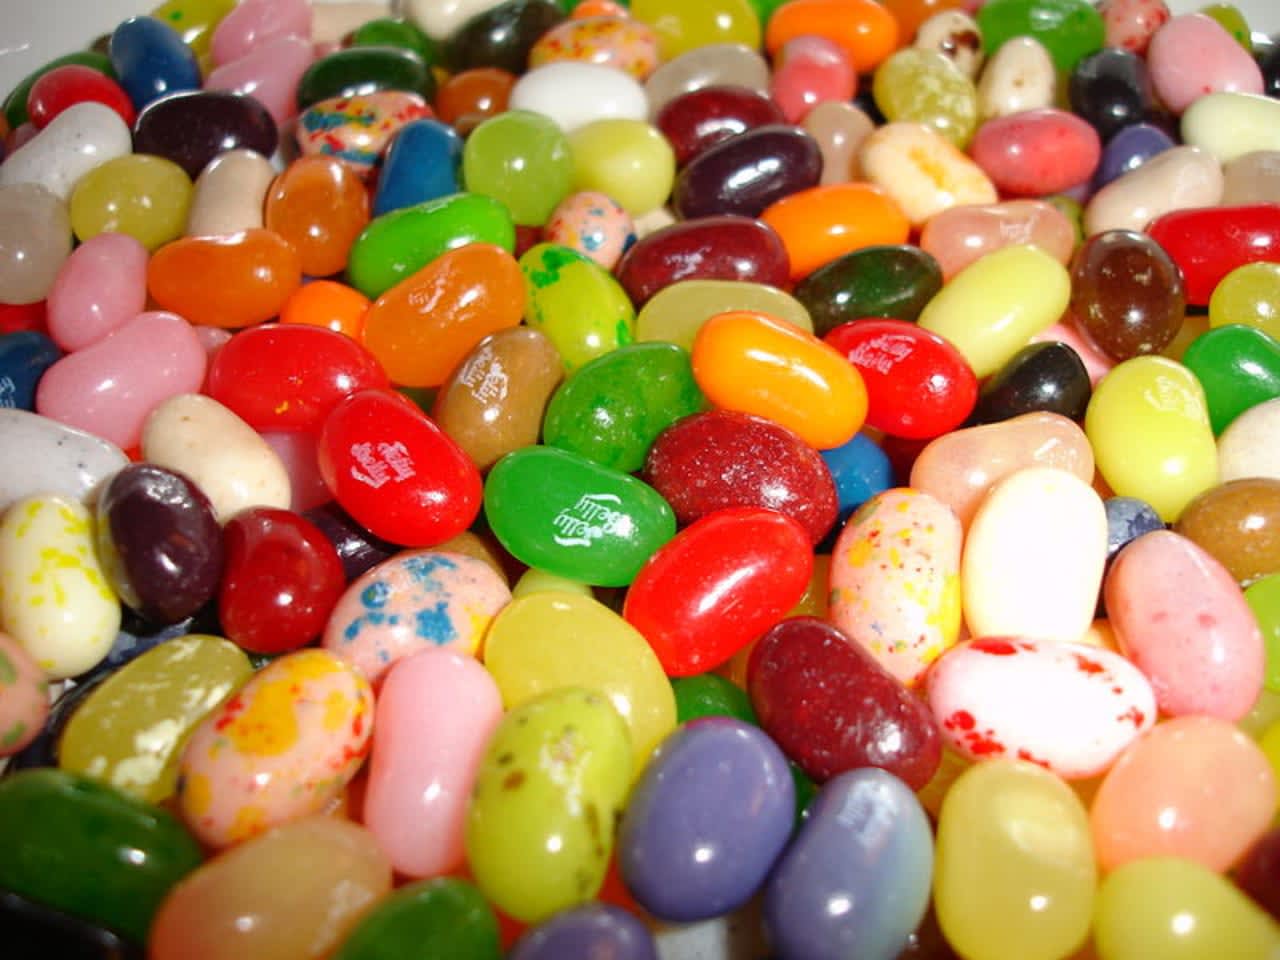 Americans gobble up more than 16 billion jelly beans on Easter.